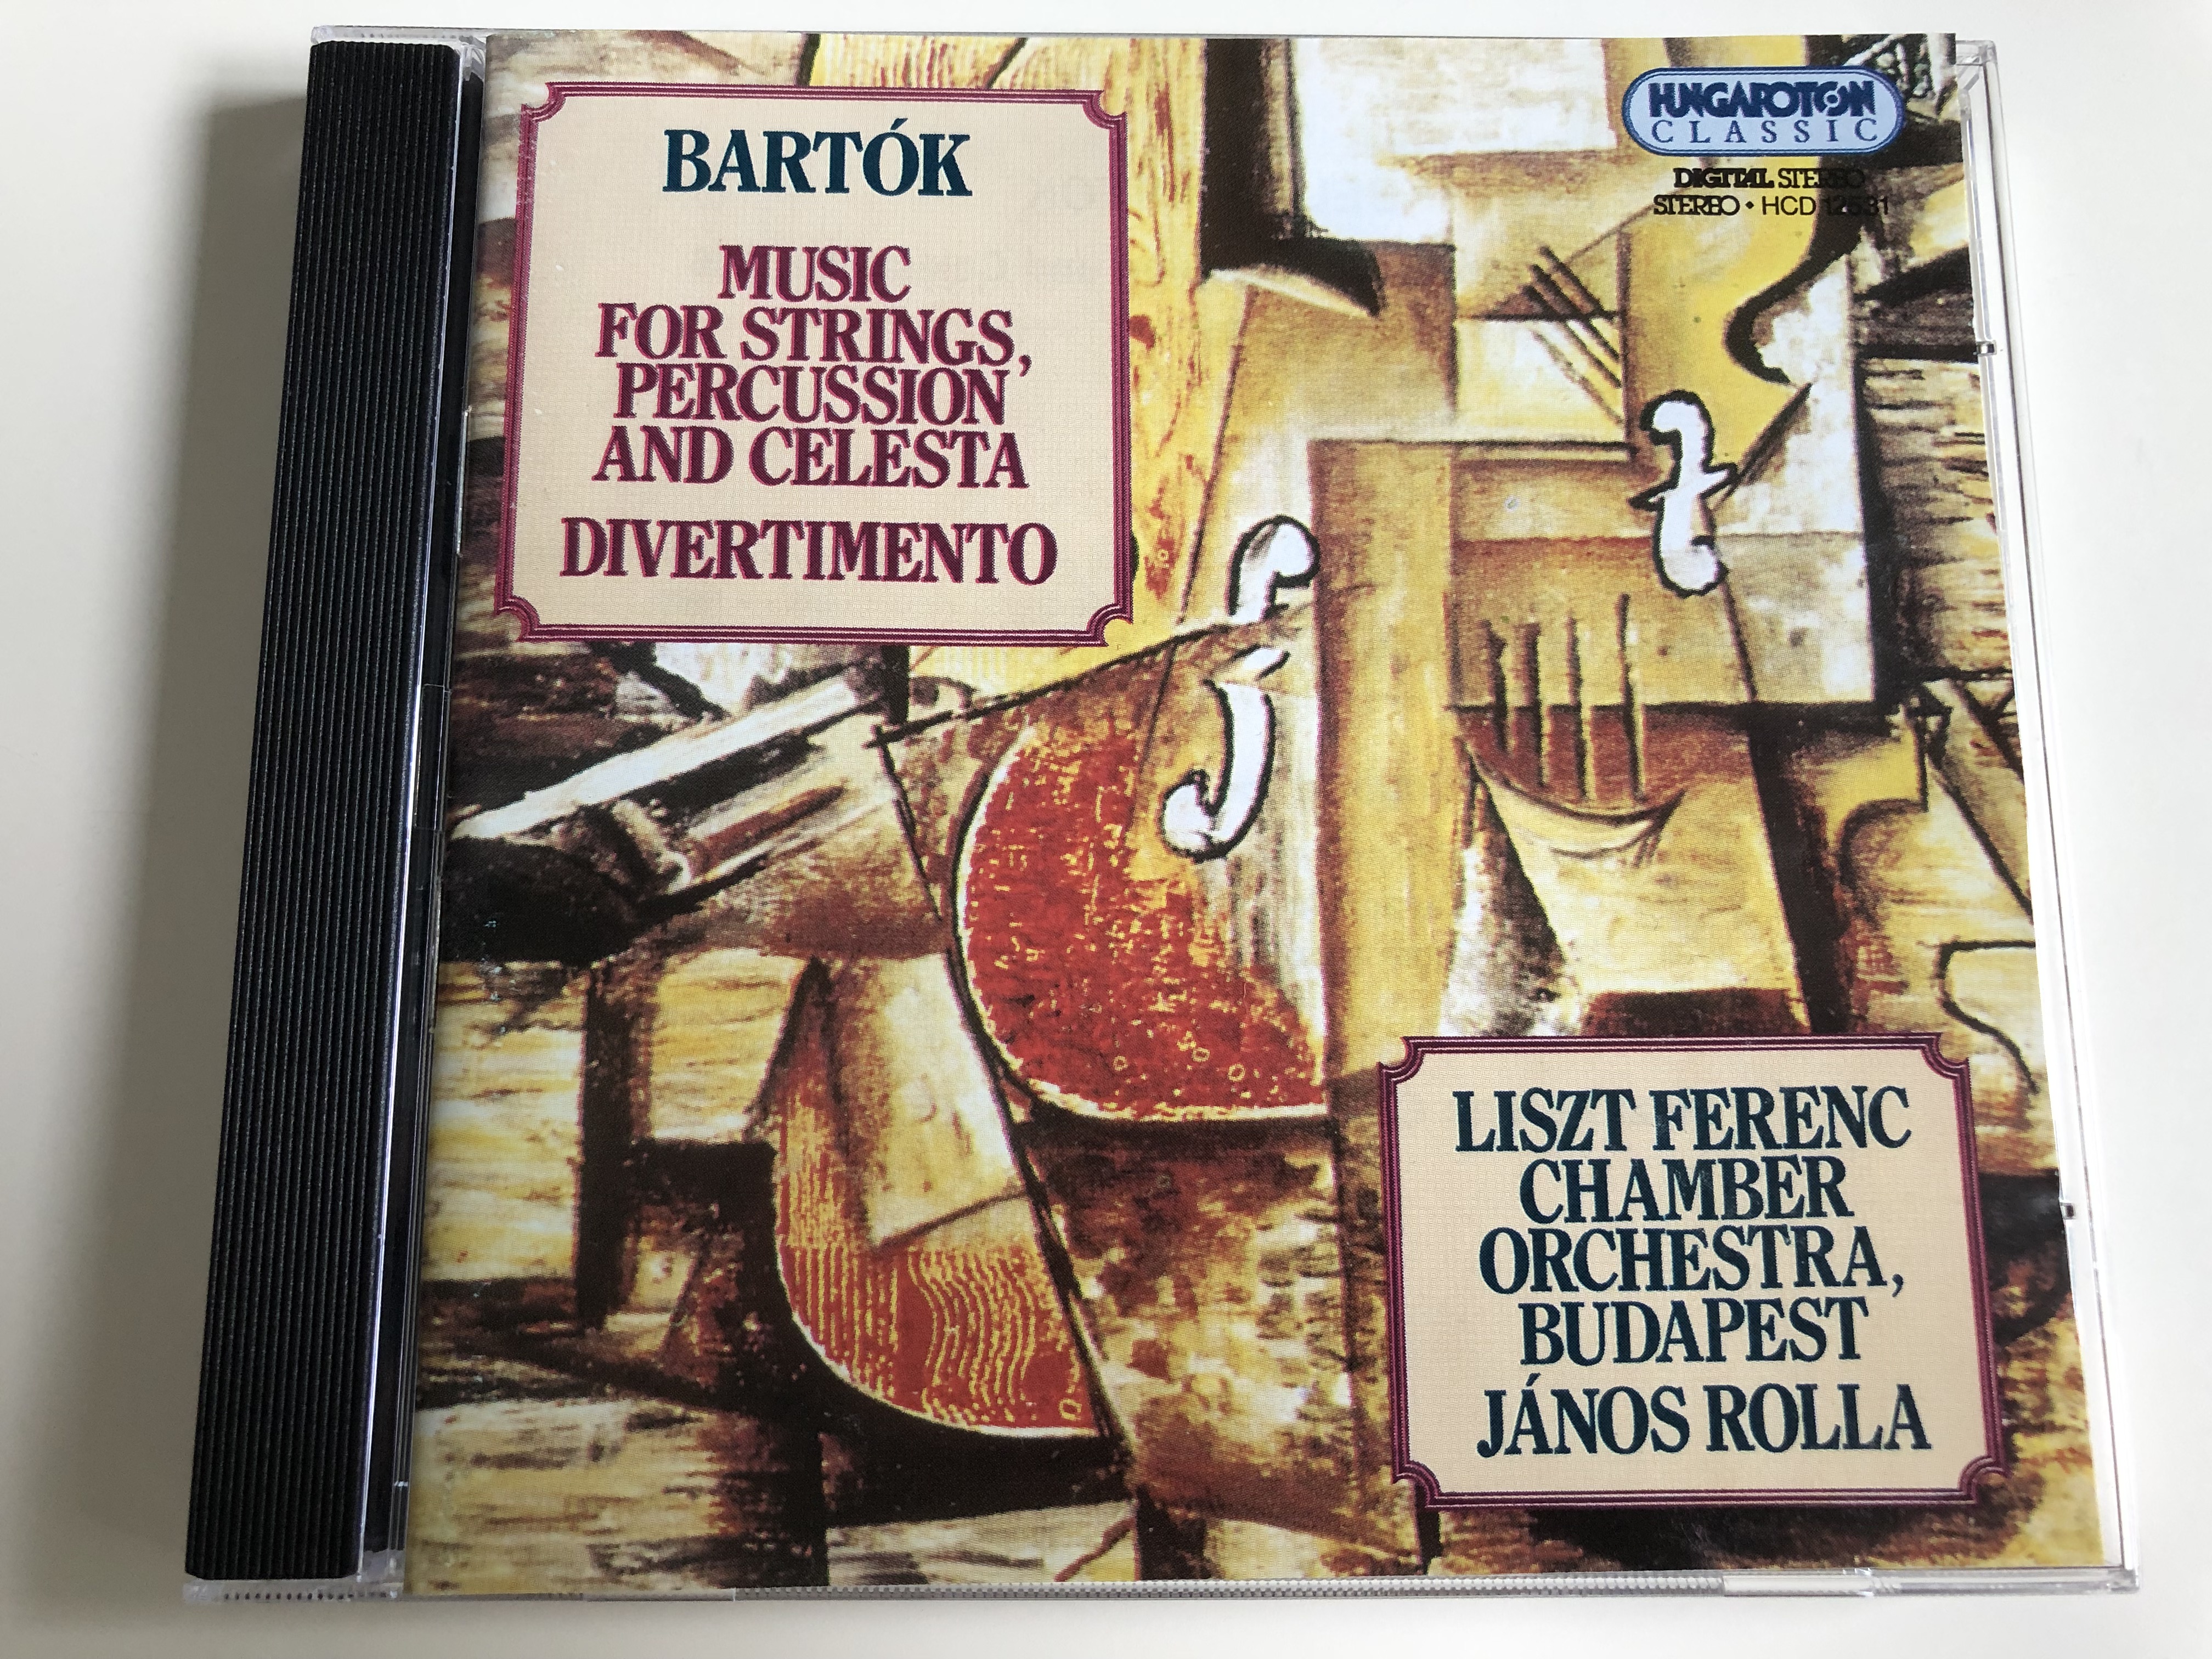 bart-k-music-for-strings-percussion-and-celesta-divertimento-liszt-ferenc-chamber-orchestra-budapest-conducted-by-j-nos-rolla-hungaroton-classic-hcd-12531-2-audio-cd-1994-1-.jpg